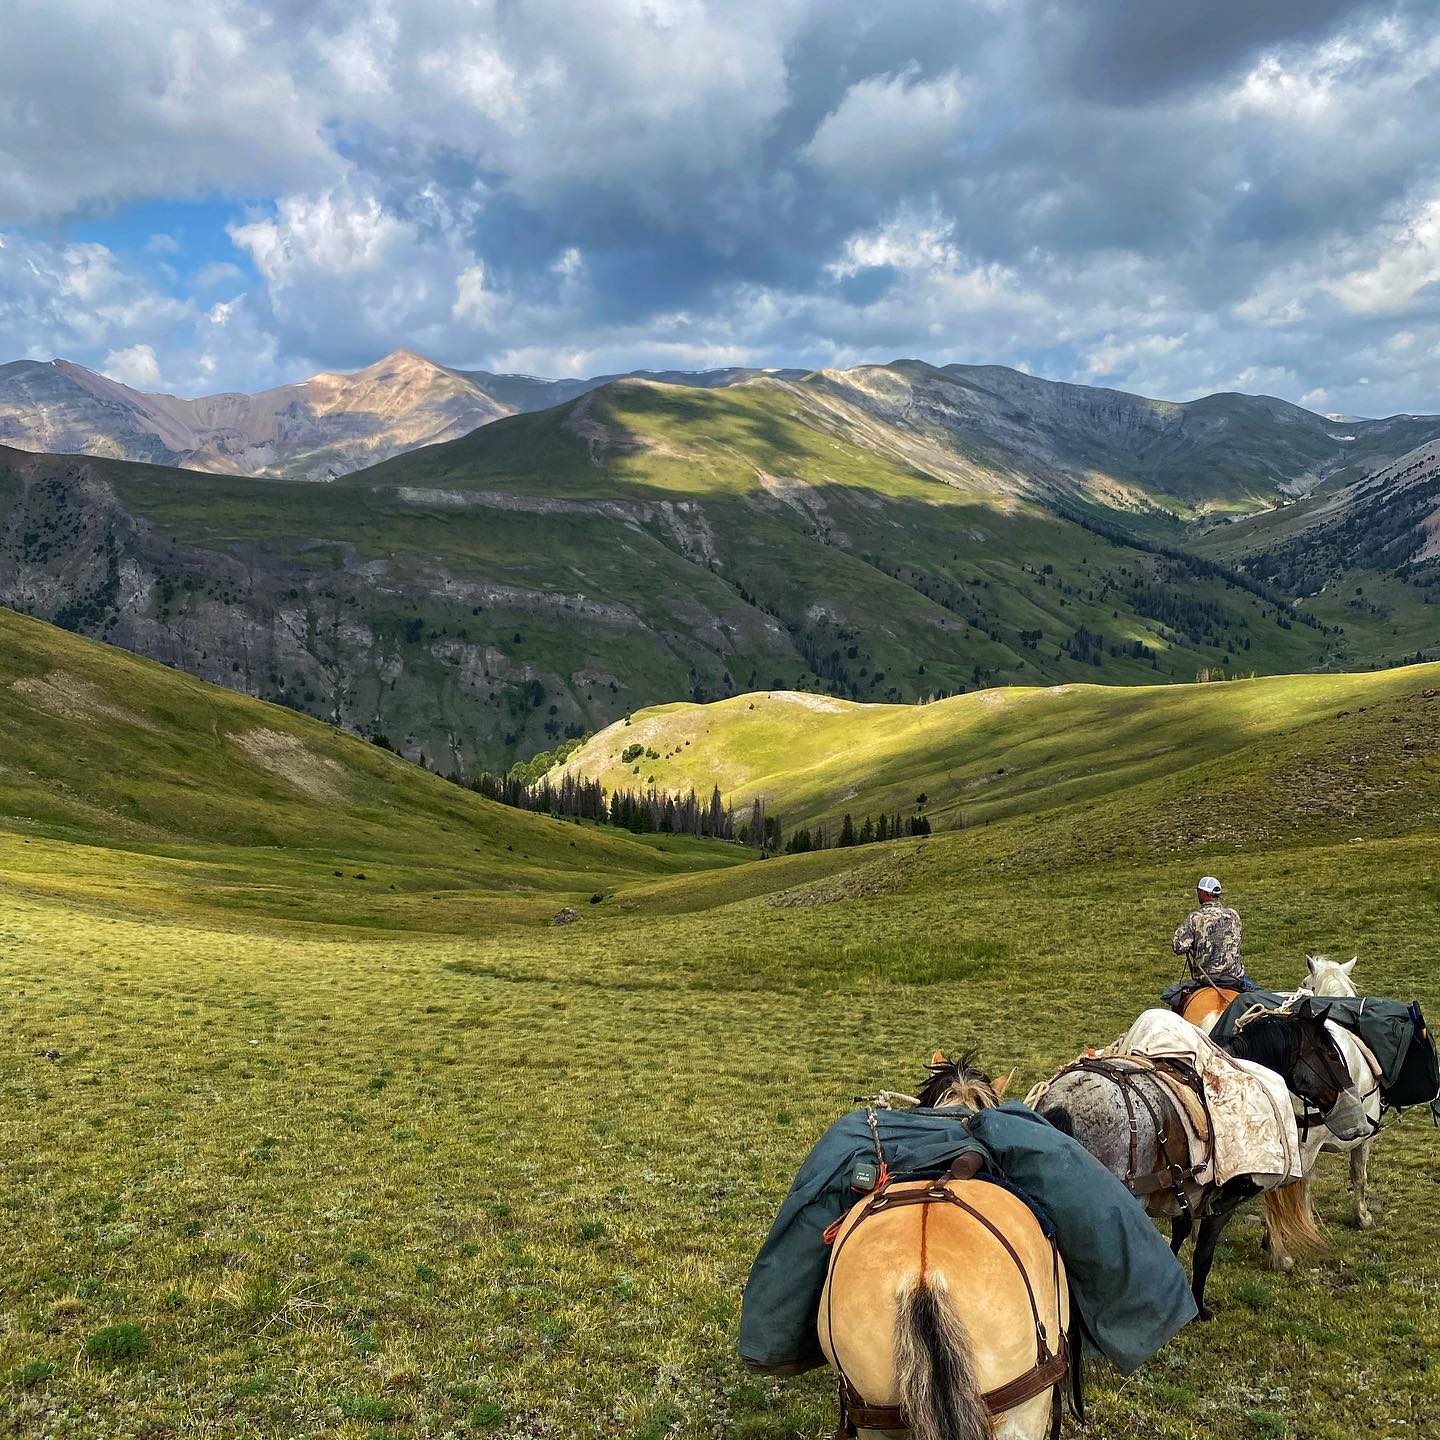 Embark on a 'Survival Holiday' in Wyoming's Wind River Country